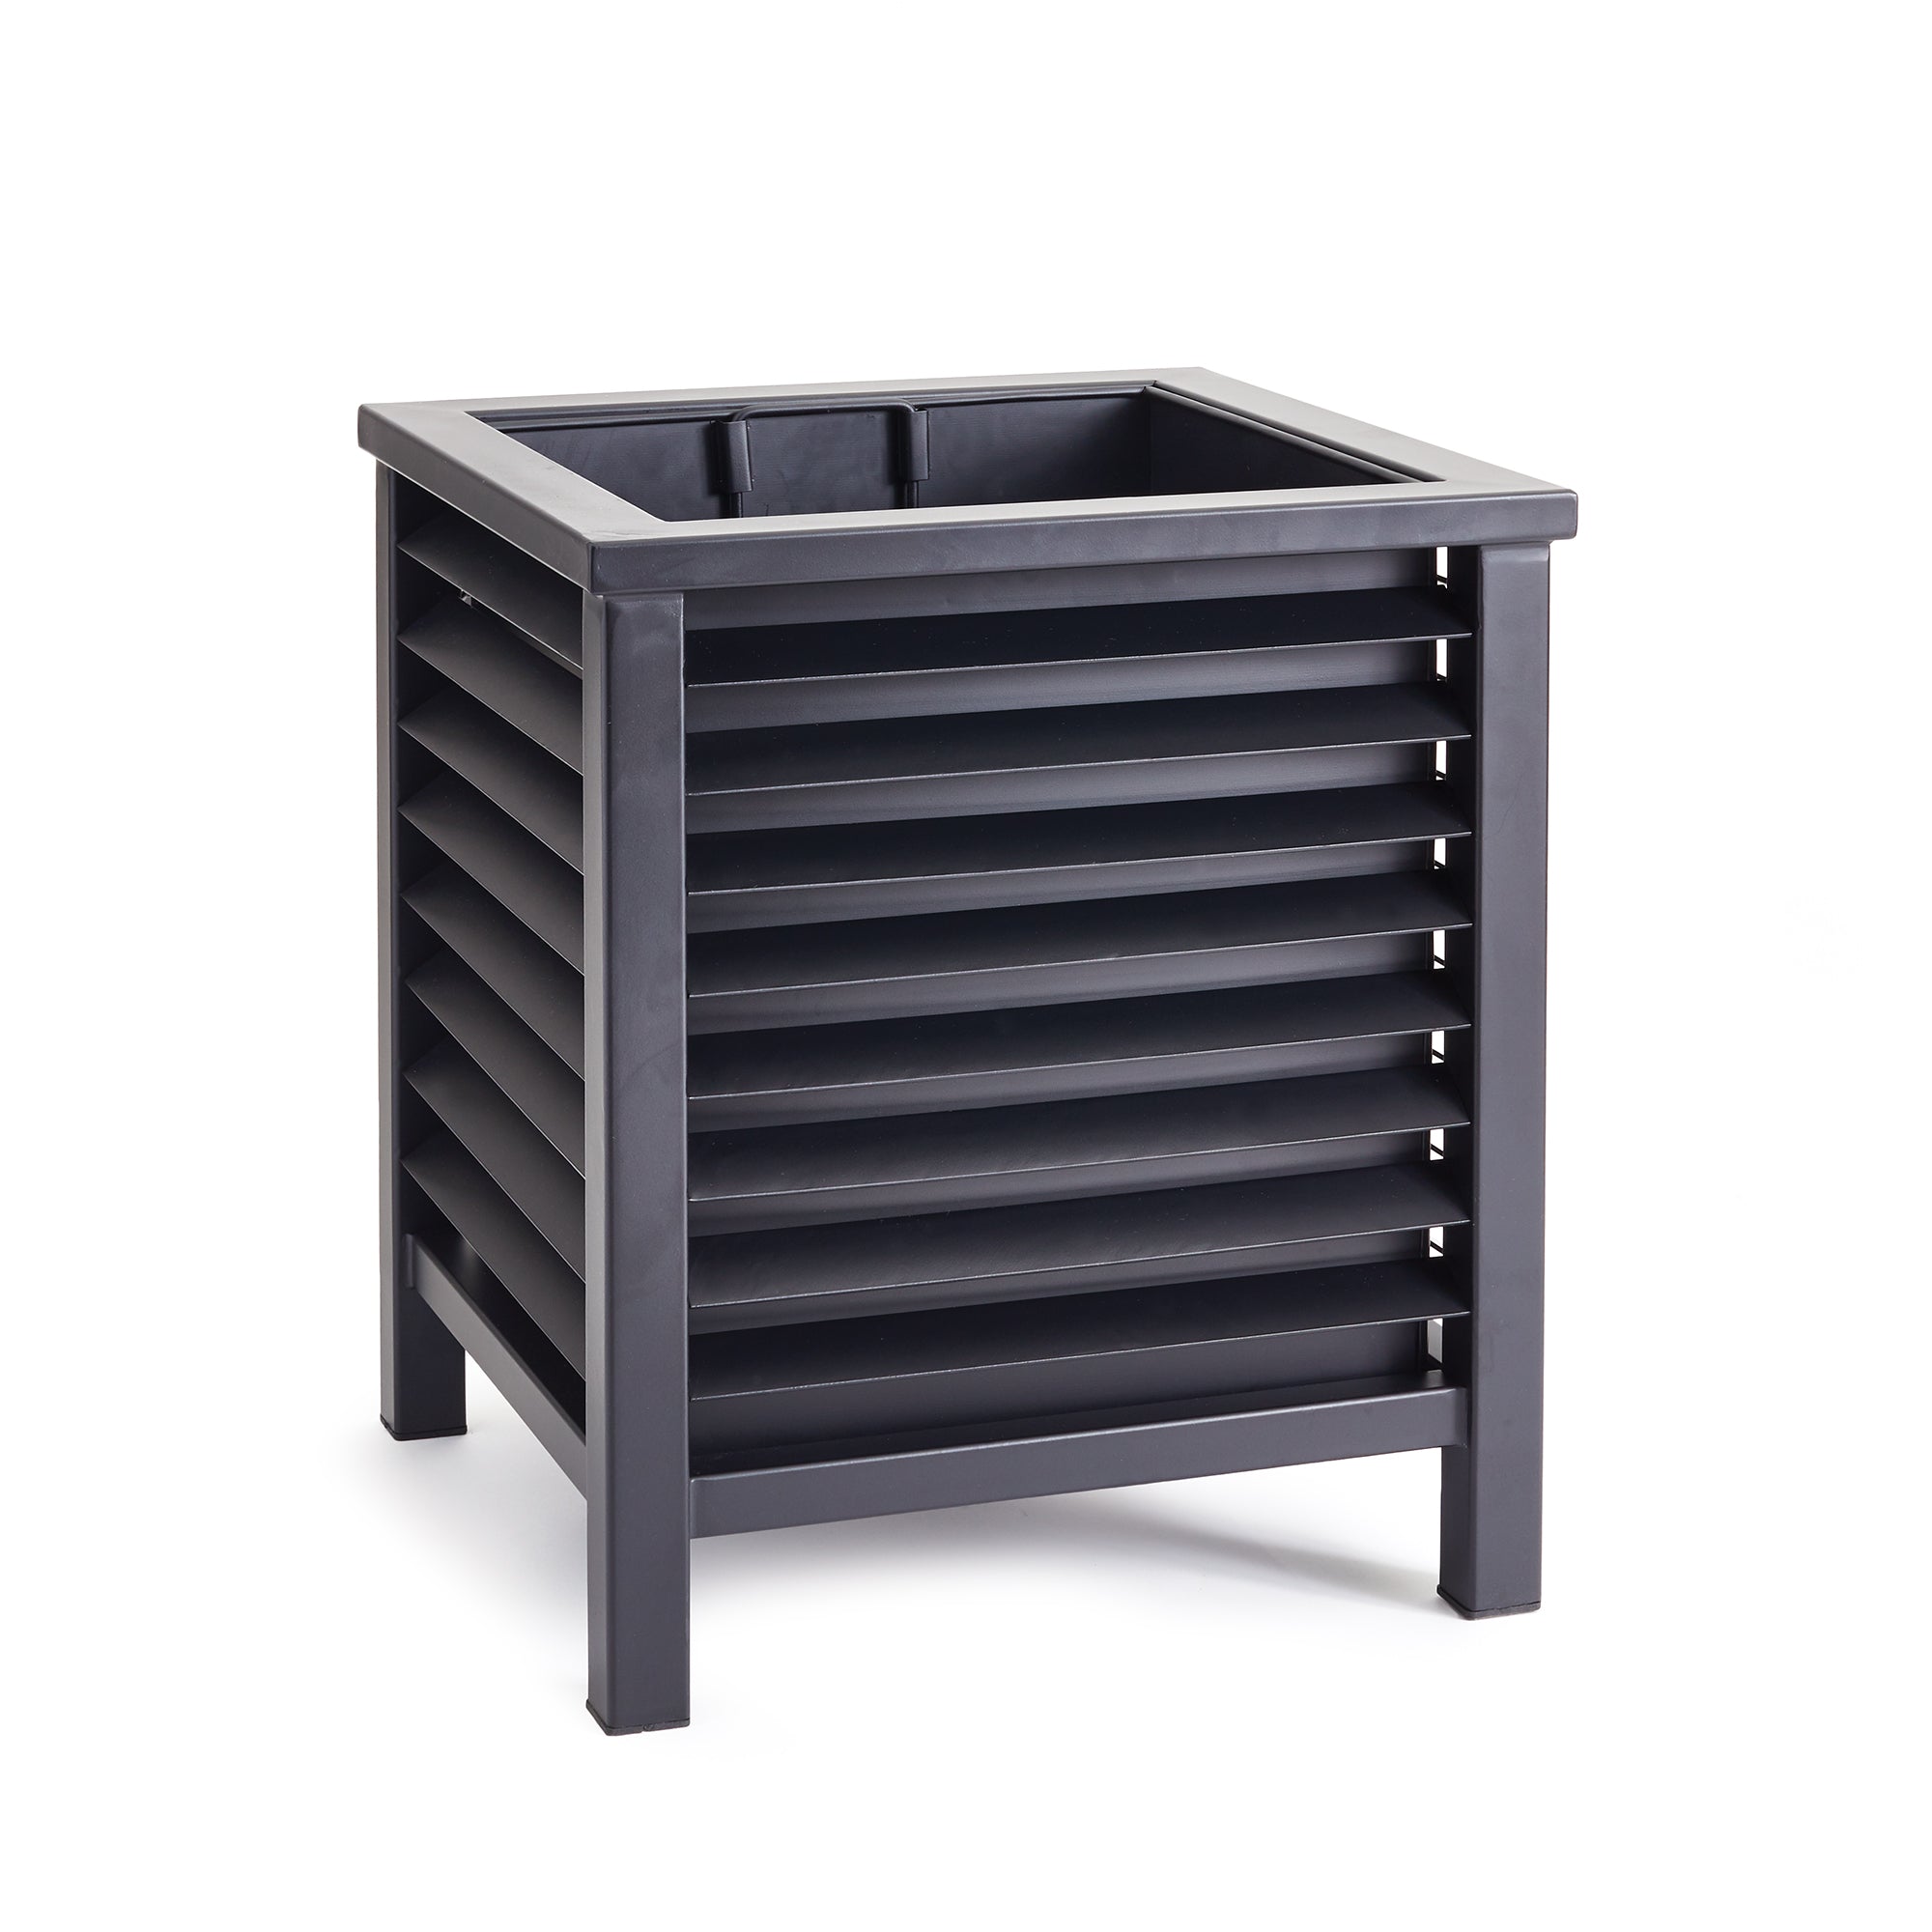 The Aberdeen Planter is as well-made as it is handsome. Powder-coated and lined with a removable insert, it holds your favorite tree inside or out. Amethyst Home provides interior design, new construction, custom furniture, and area rugs in the Newport Beach metro area.